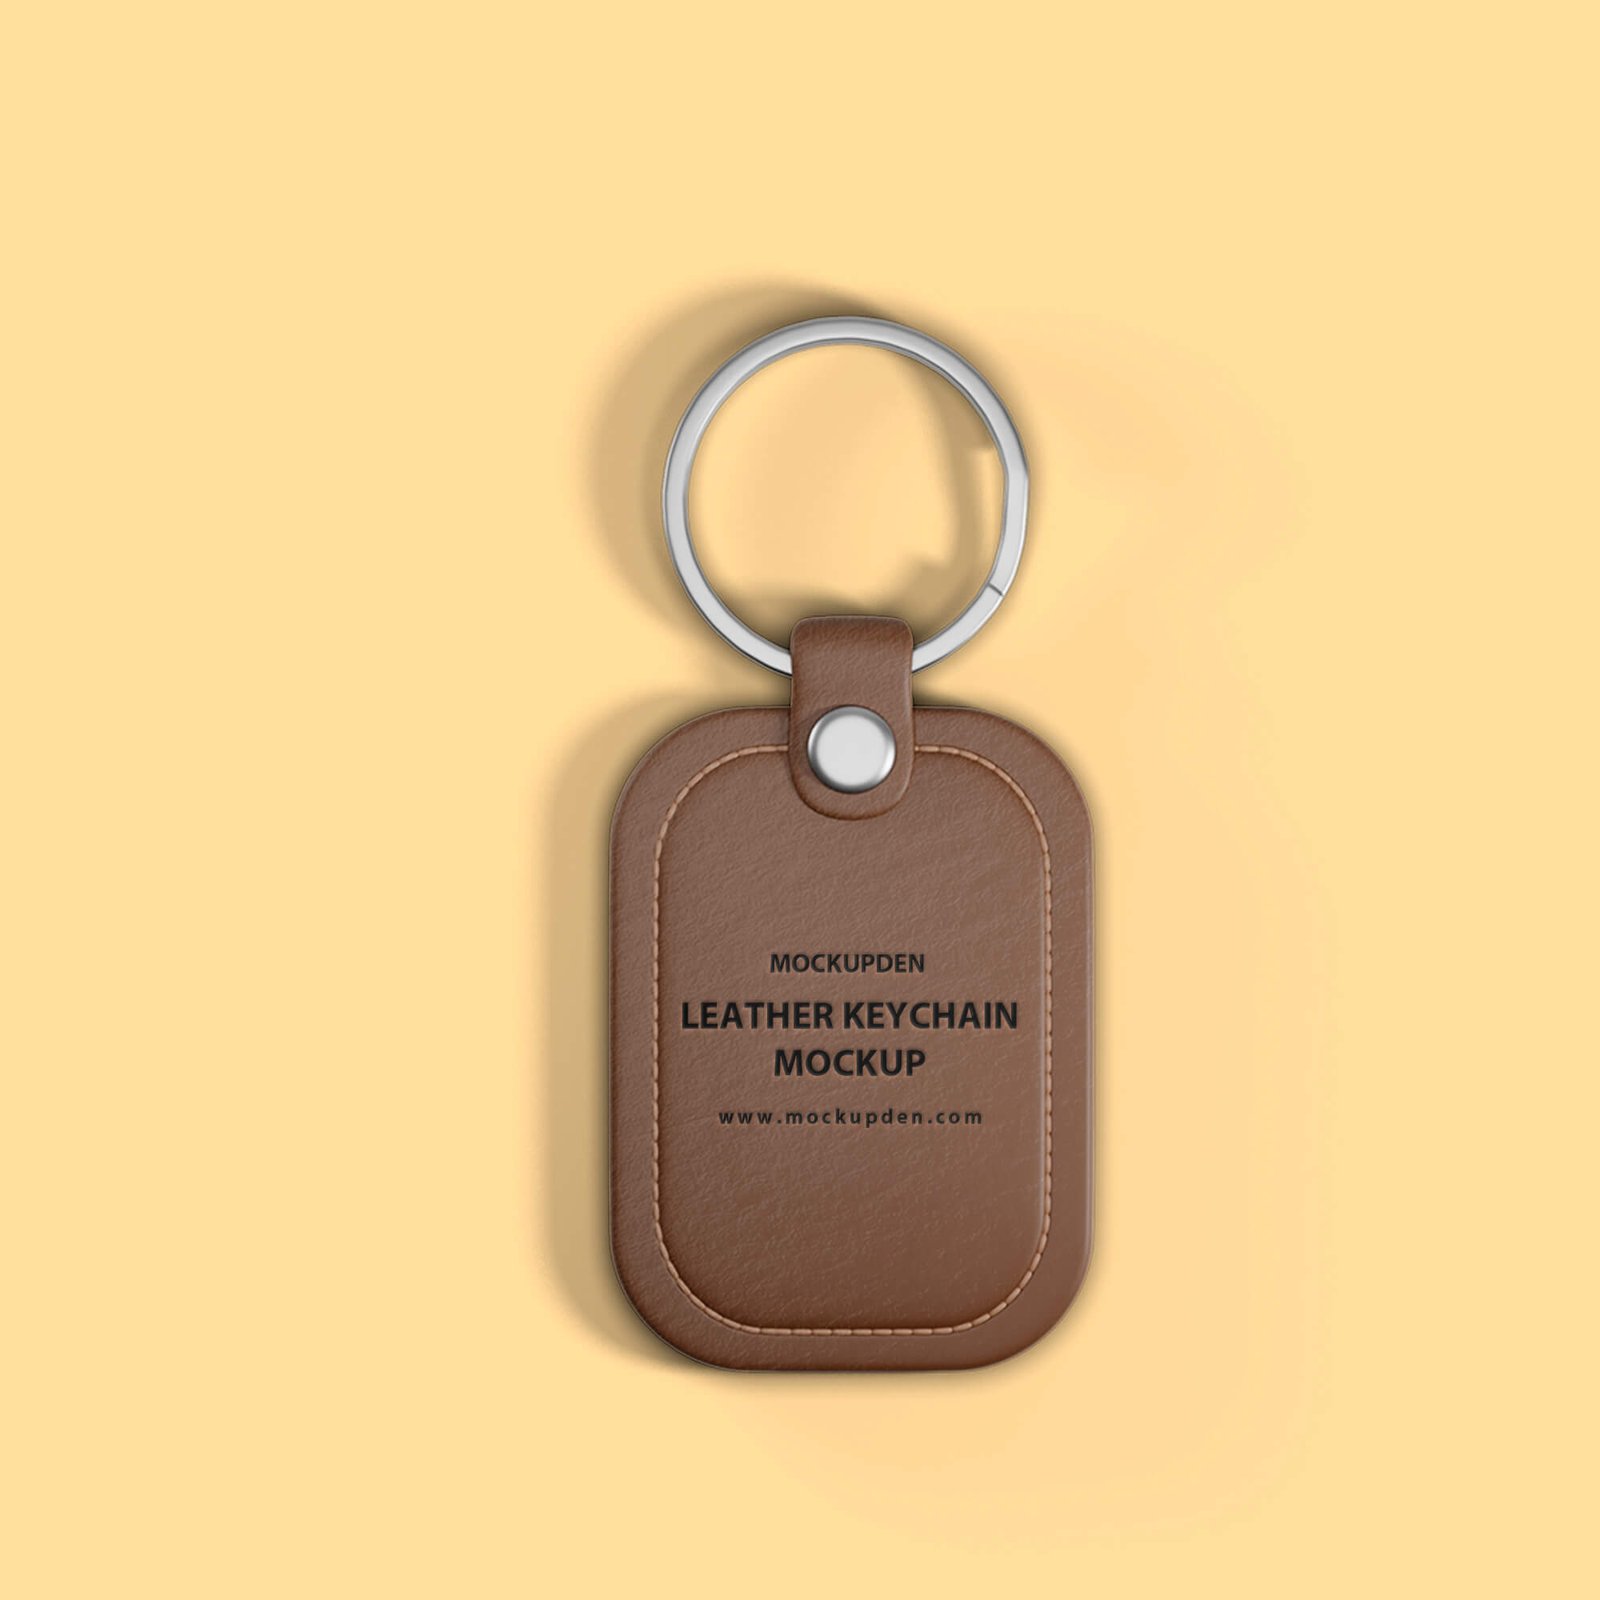 Design Free Leather Keychain Mockup PSD Template